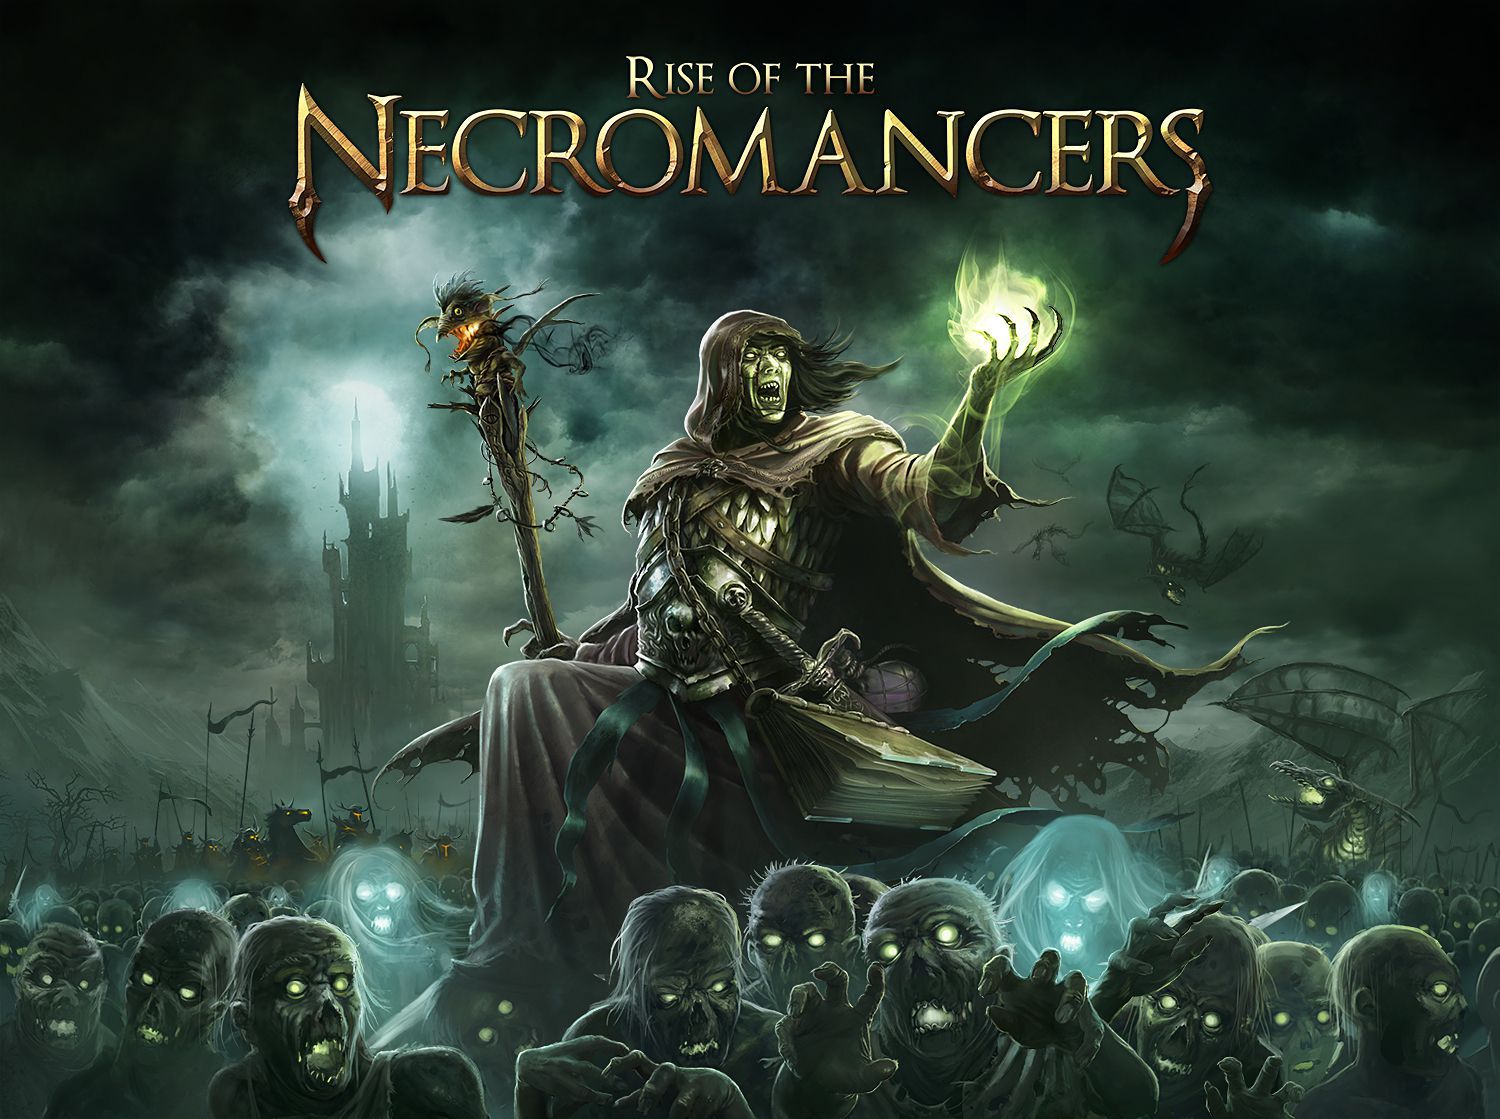 Sword of the Necromancer download the new version for windows